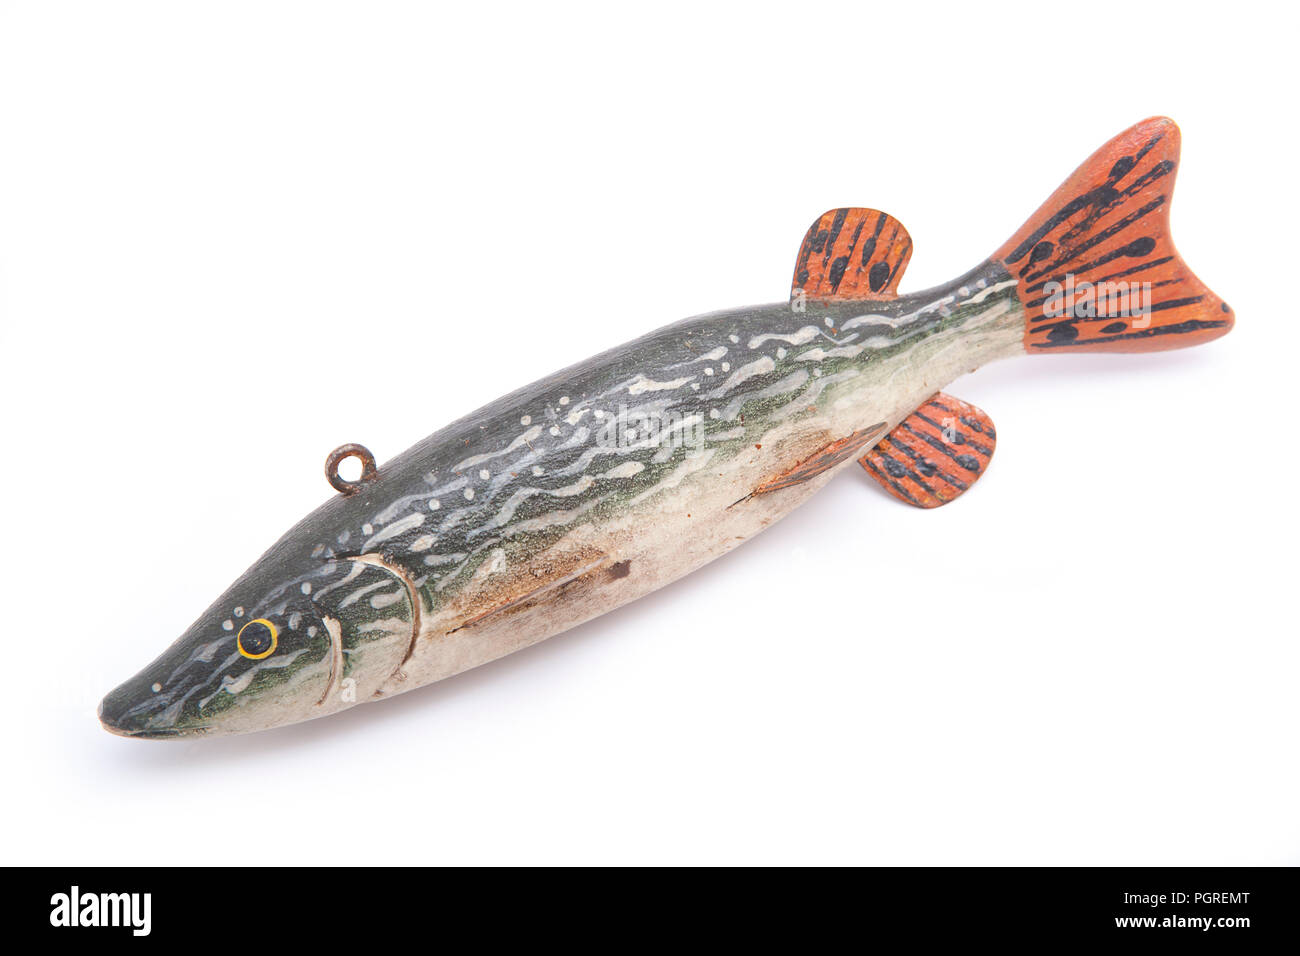 An old wooden decoy fish in the form of a pike. These lures were often used in ice fishing where the decoy would be lowered through a hole in the ice  Stock Photo